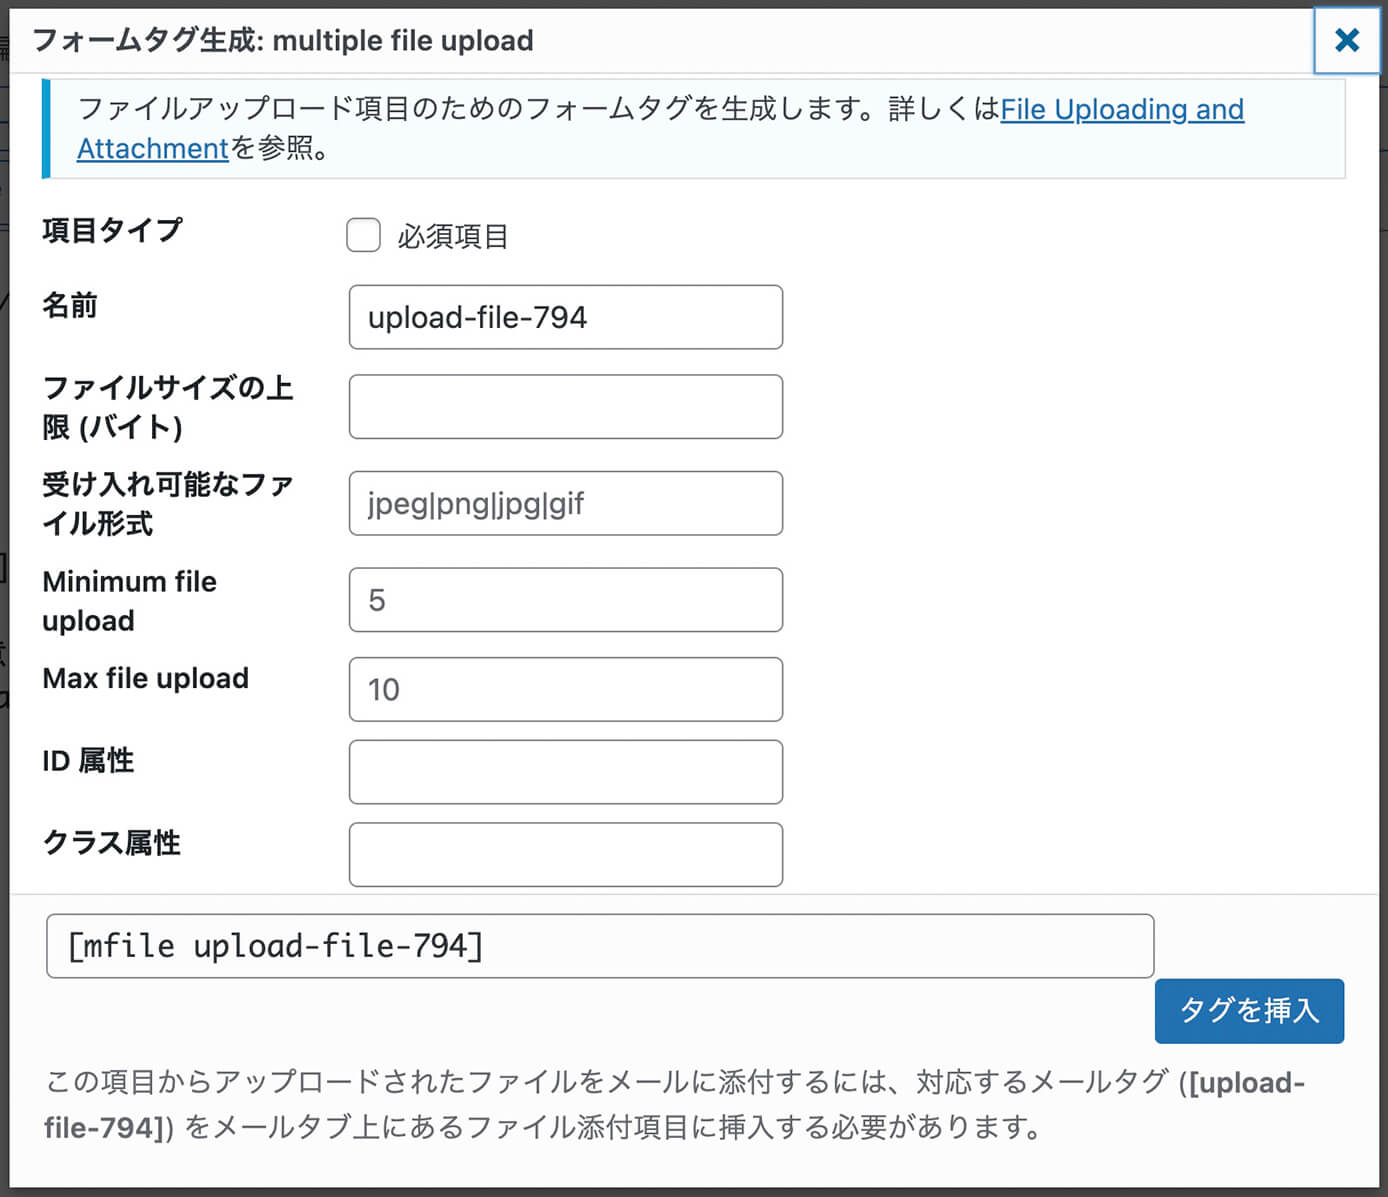 Contact From 7：multiple file uploadフォーム作成画面